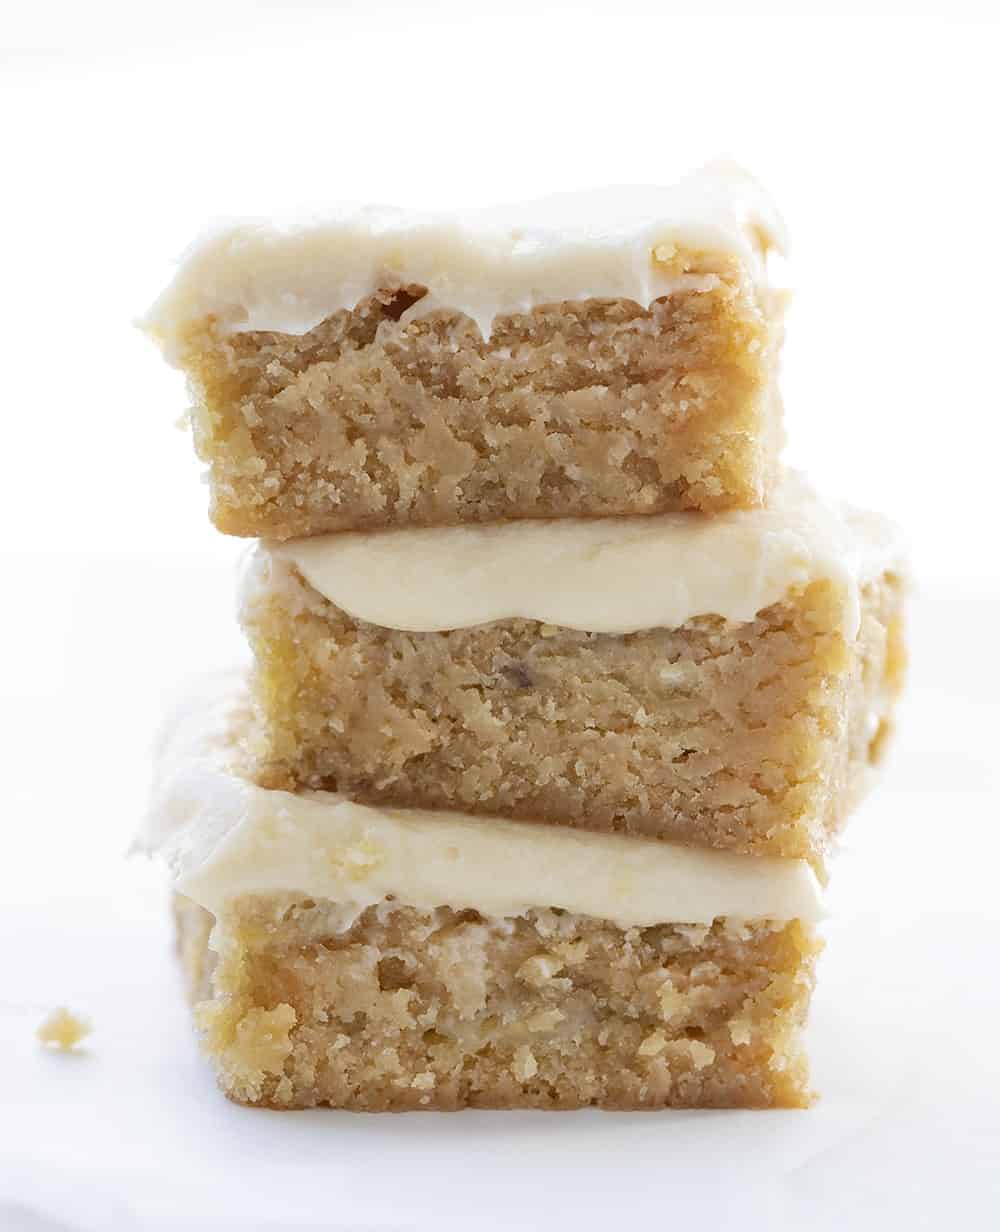 Ooey Gooey Banana Bars with Salted Caramel Frosting Stacked 3 High